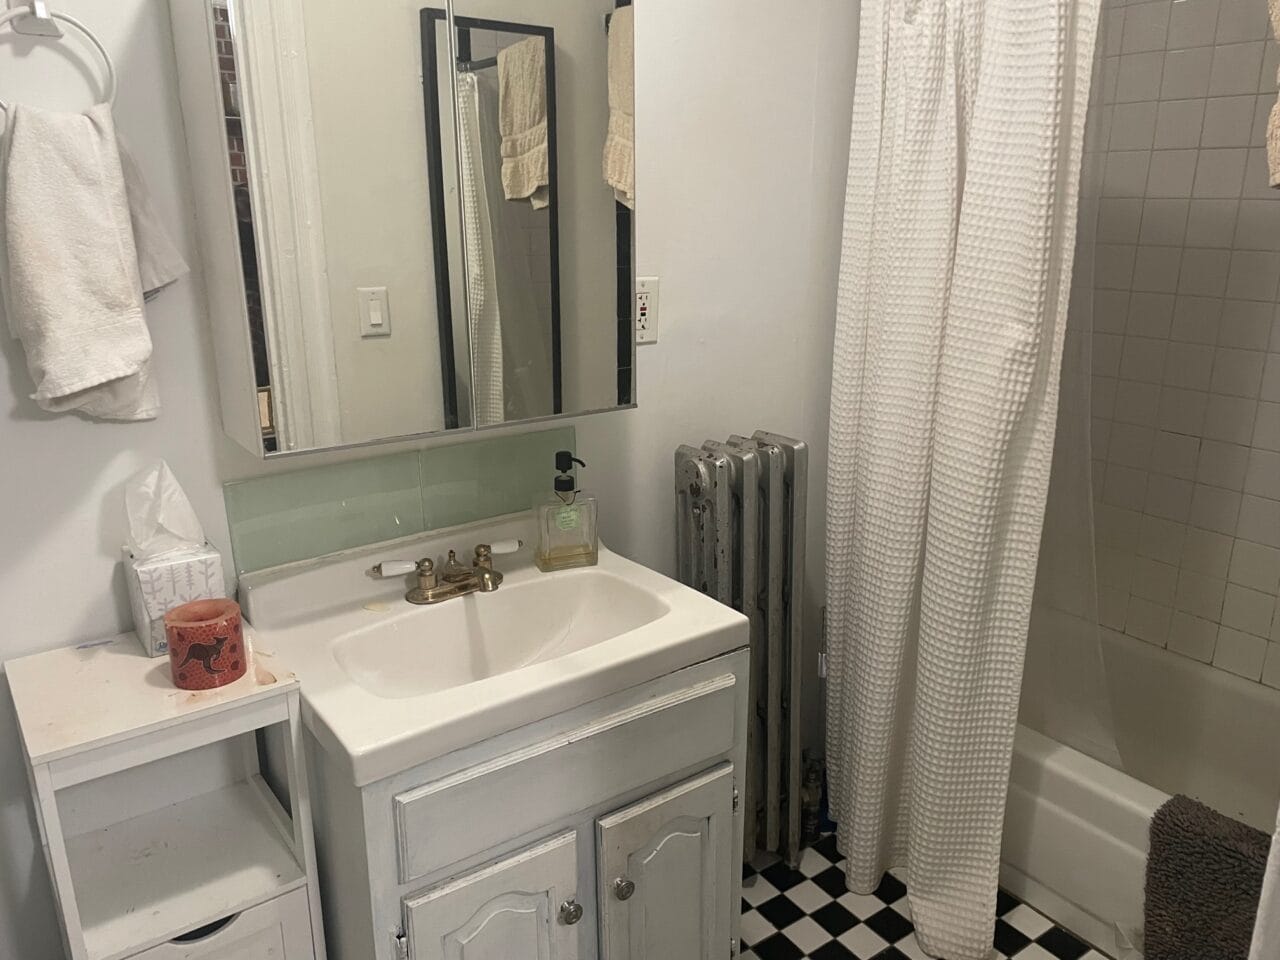 , Short-term furnished studio apartment in Park Slope, NY available